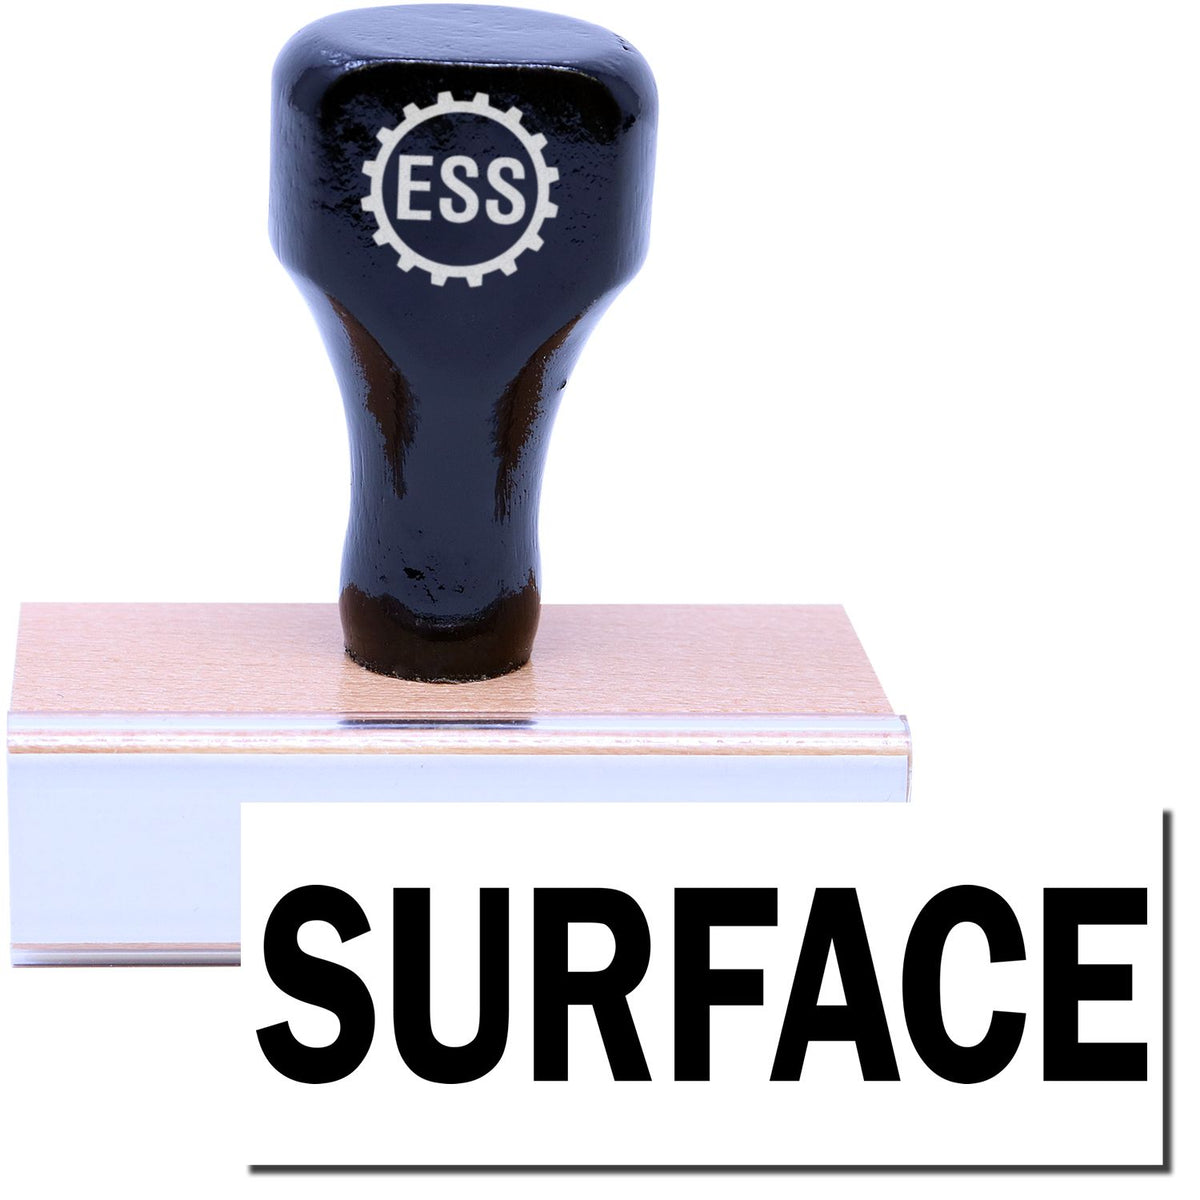 A stock office rubber stamp with a stamped image showing how the text &quot;SURFACE&quot; in a large font is displayed after stamping.